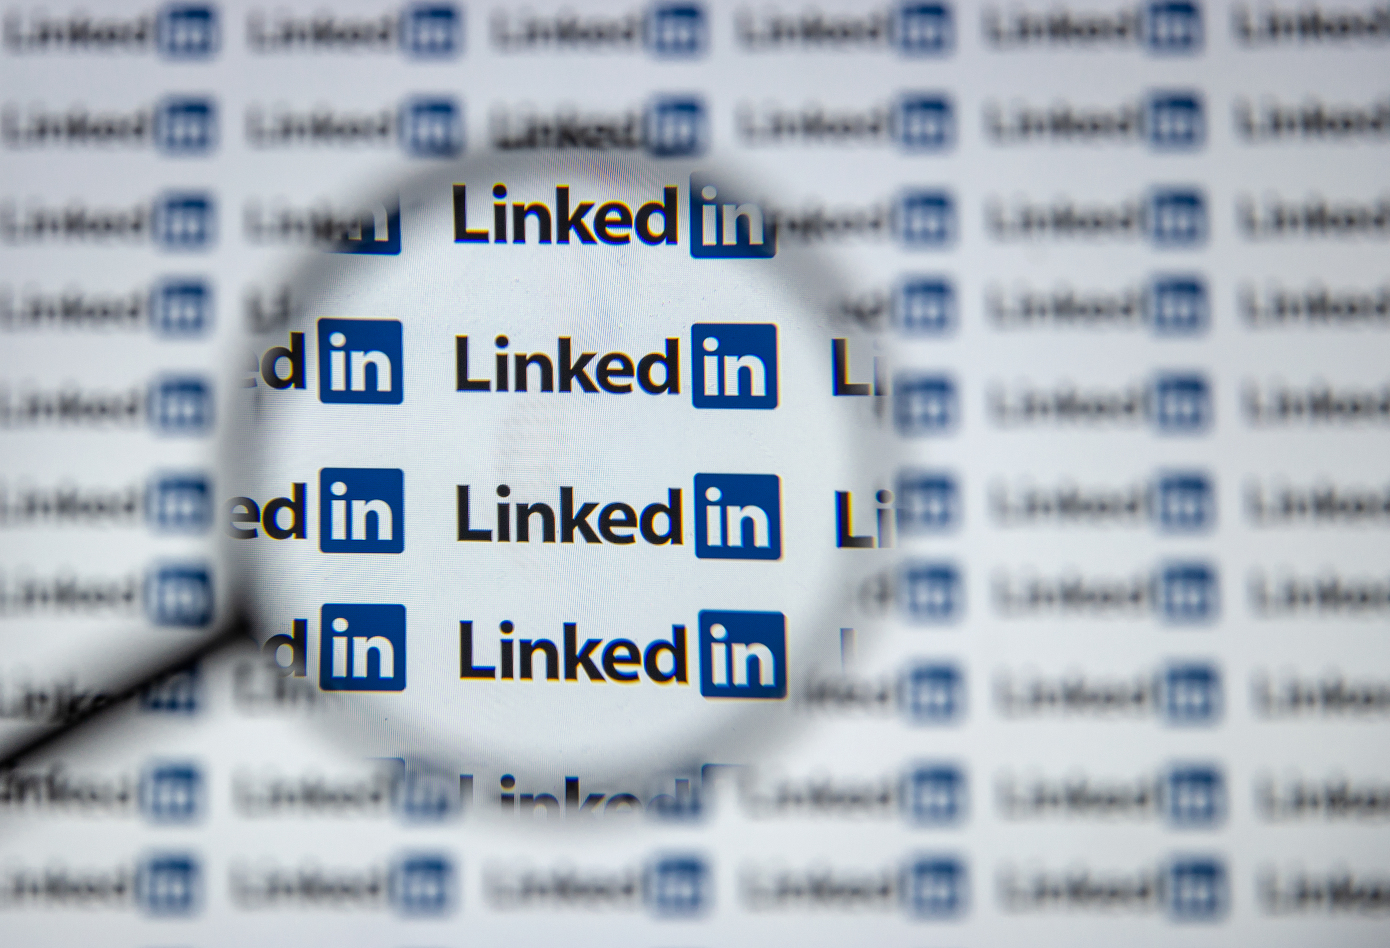 LinkedIn removes its Stories feature to work on short-format videos